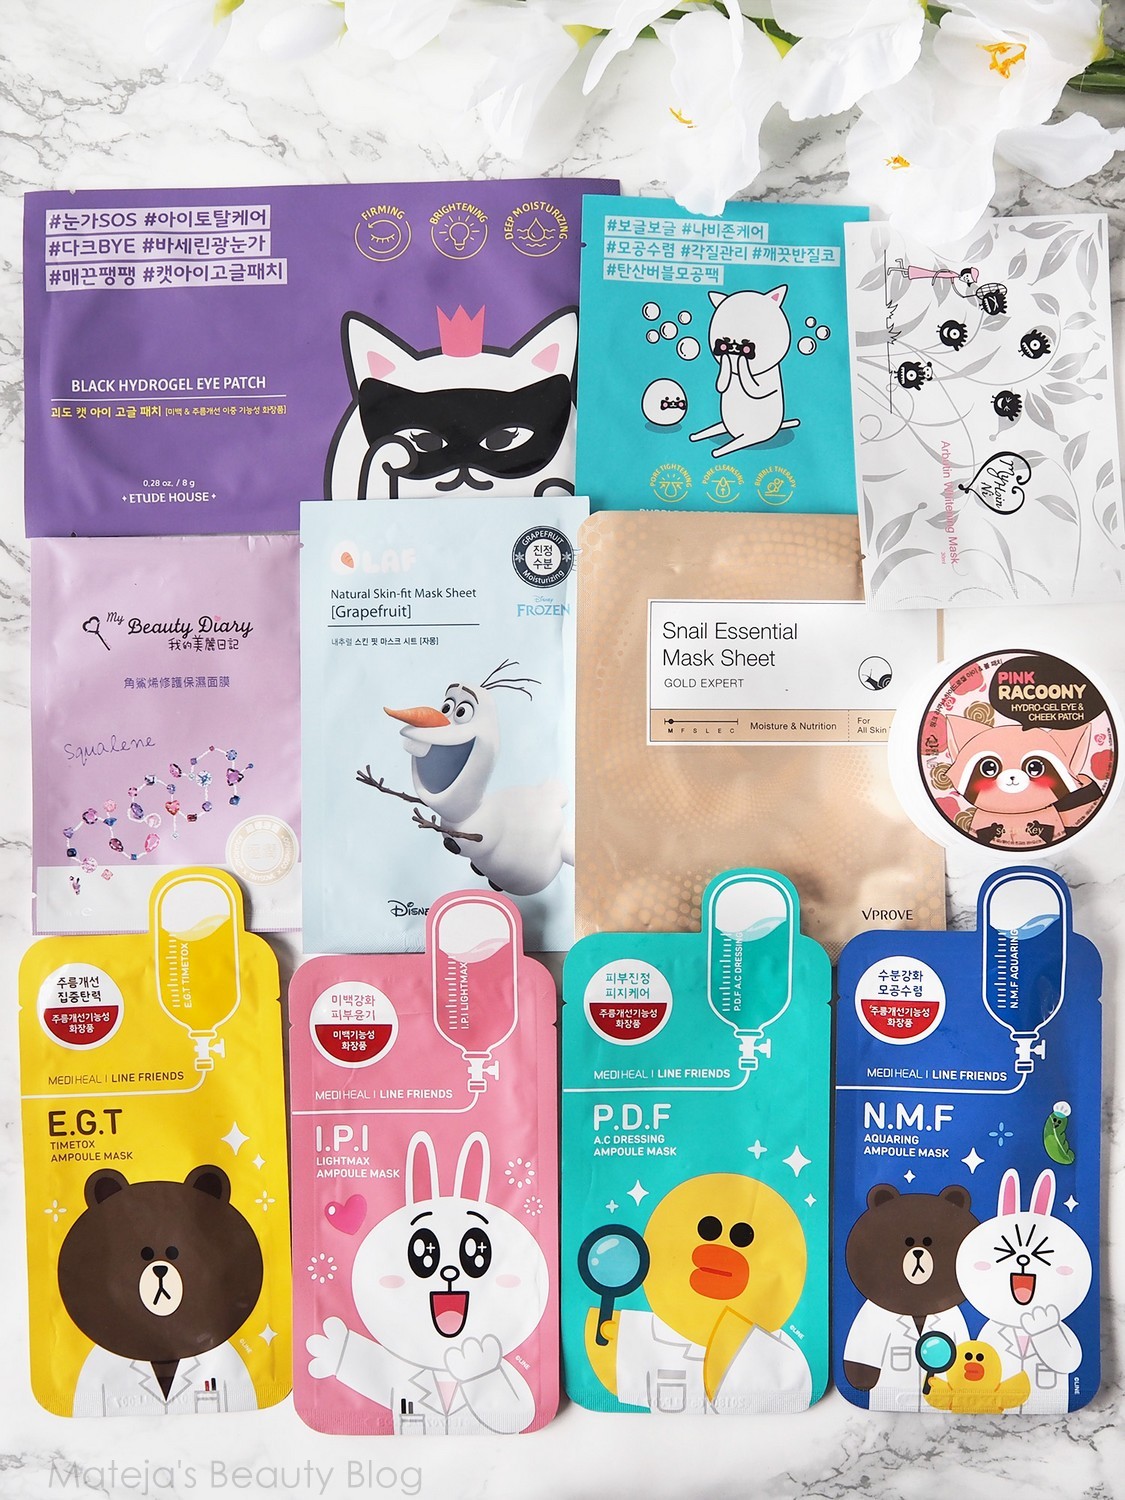 Sheet Masks and Patches: Etude House, My Beauty Diary, Mediheal, Saem, Secret Key and Vprove